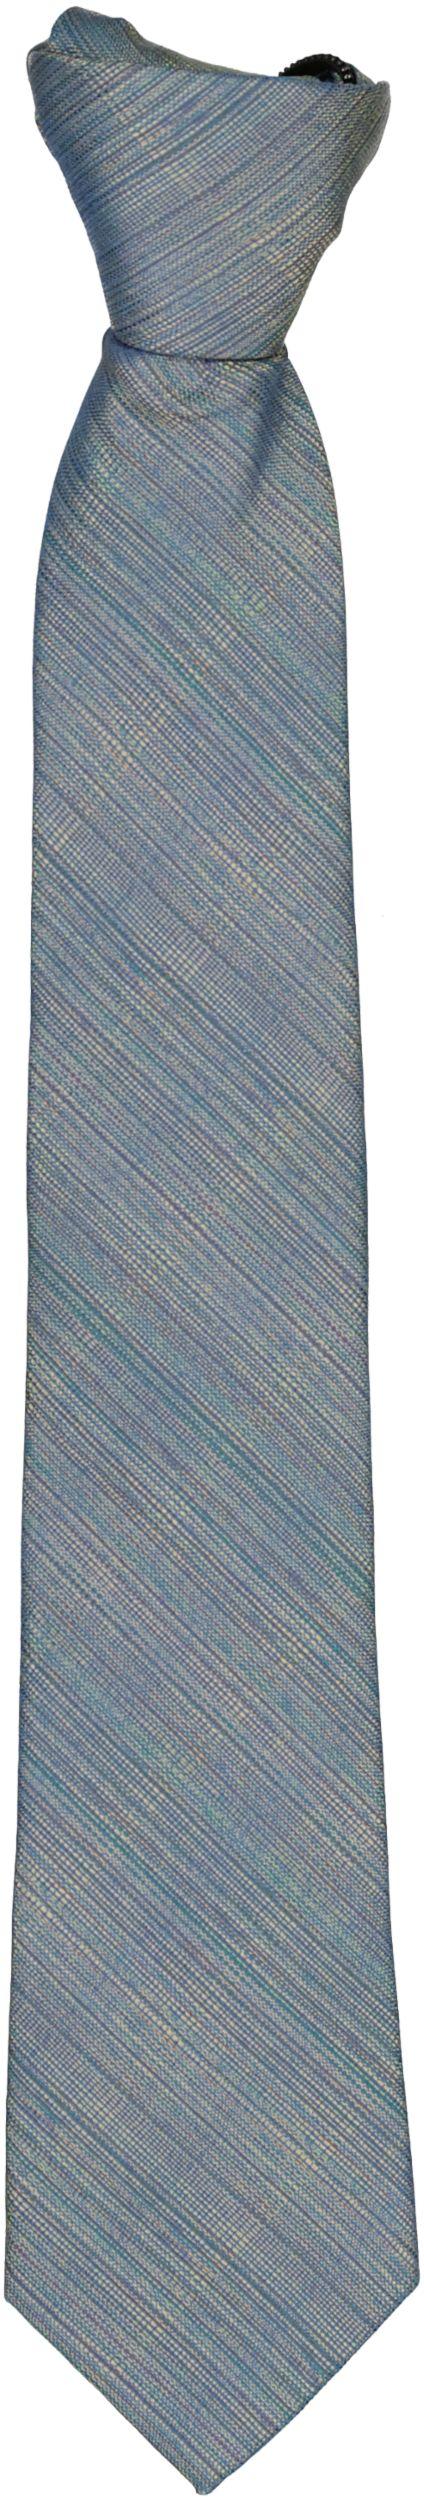 T.O. Collection Mens Necktie - TO275